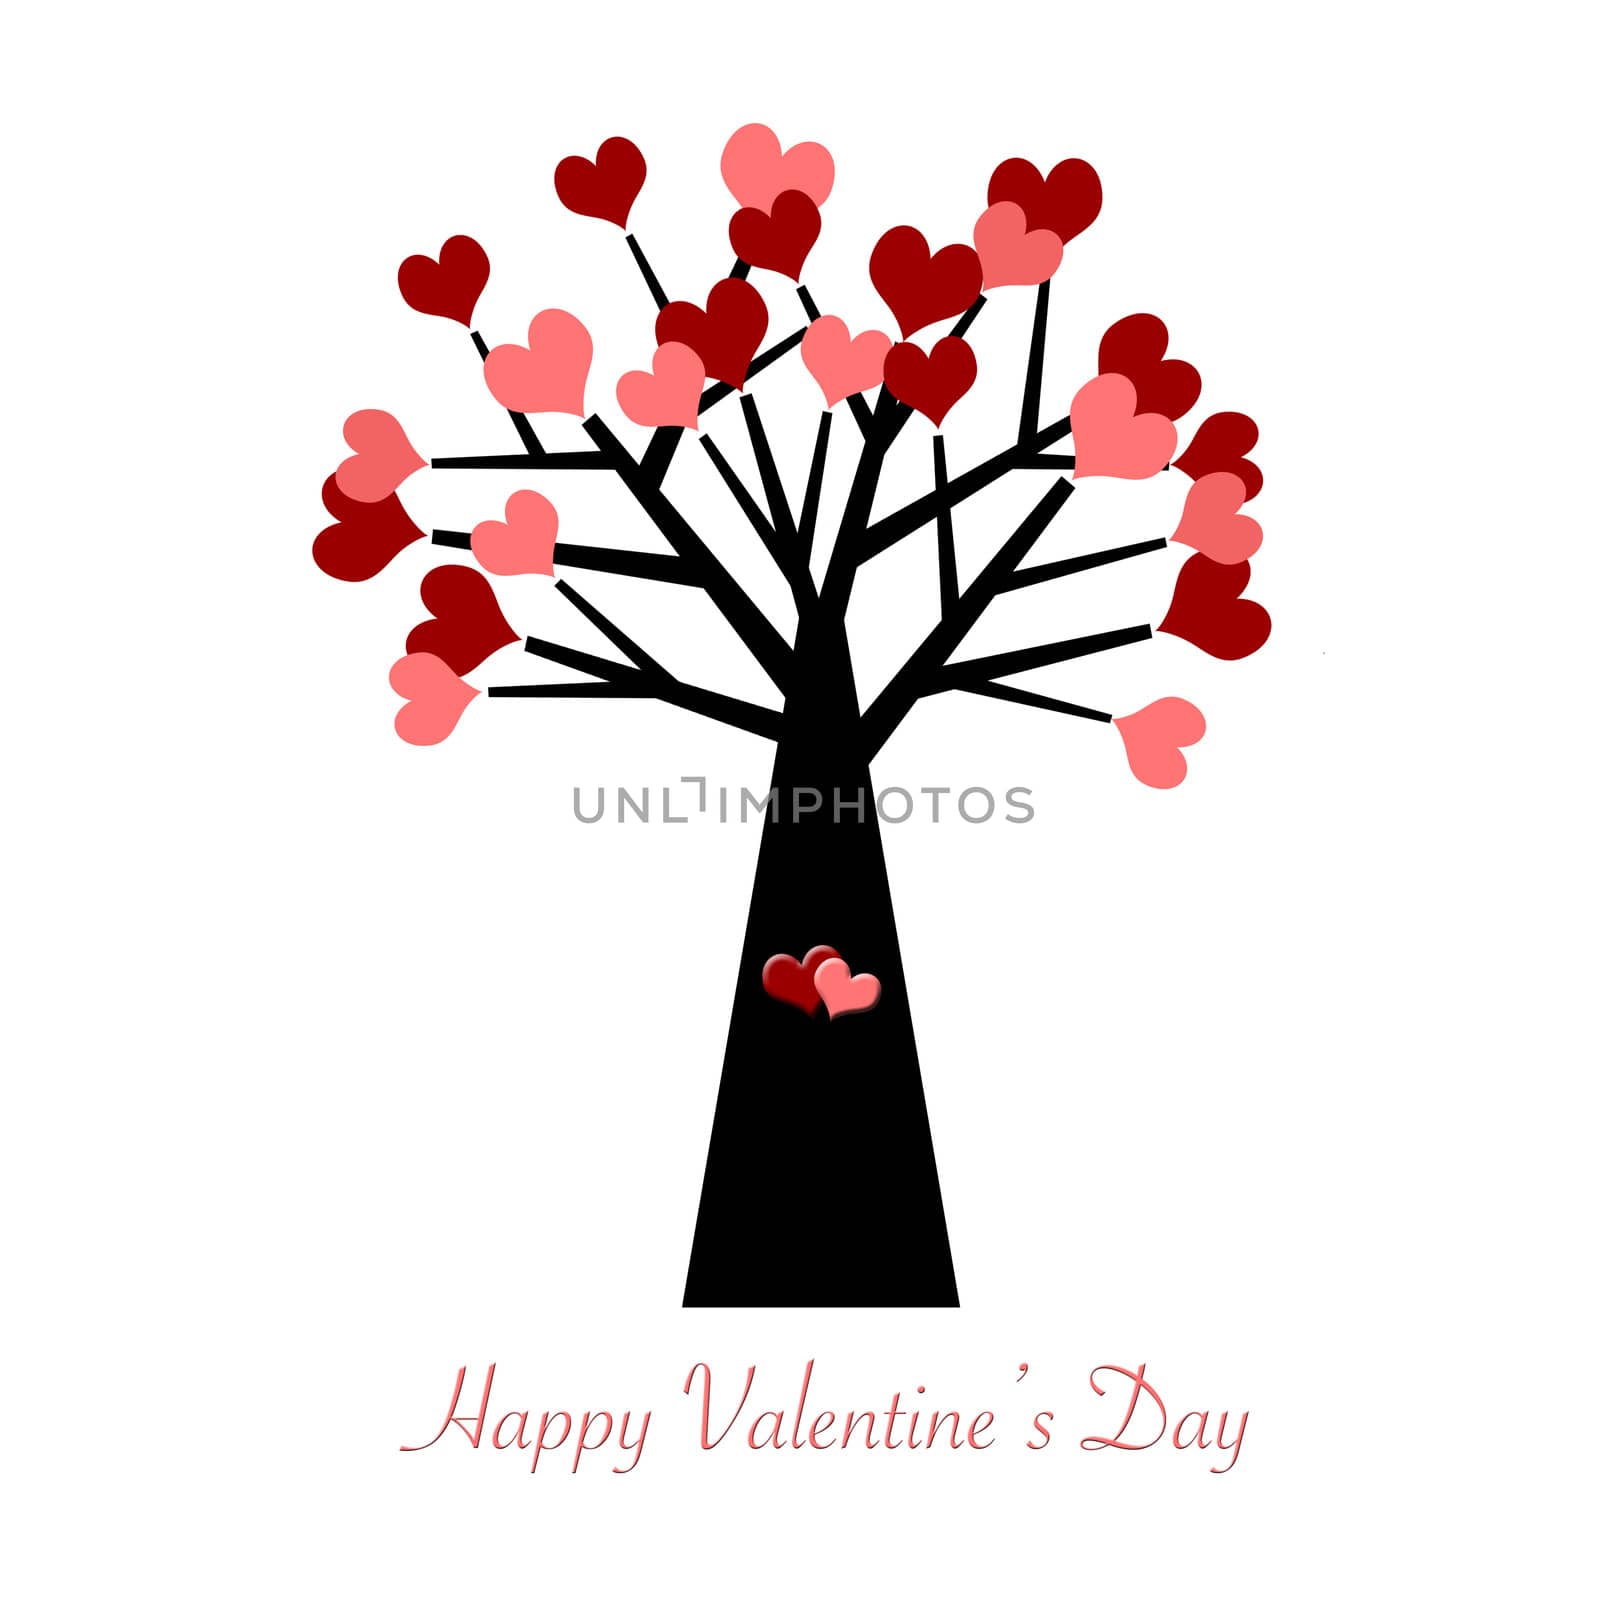 Valentines Day Tree with Red and Pink Hearts by Davidgn